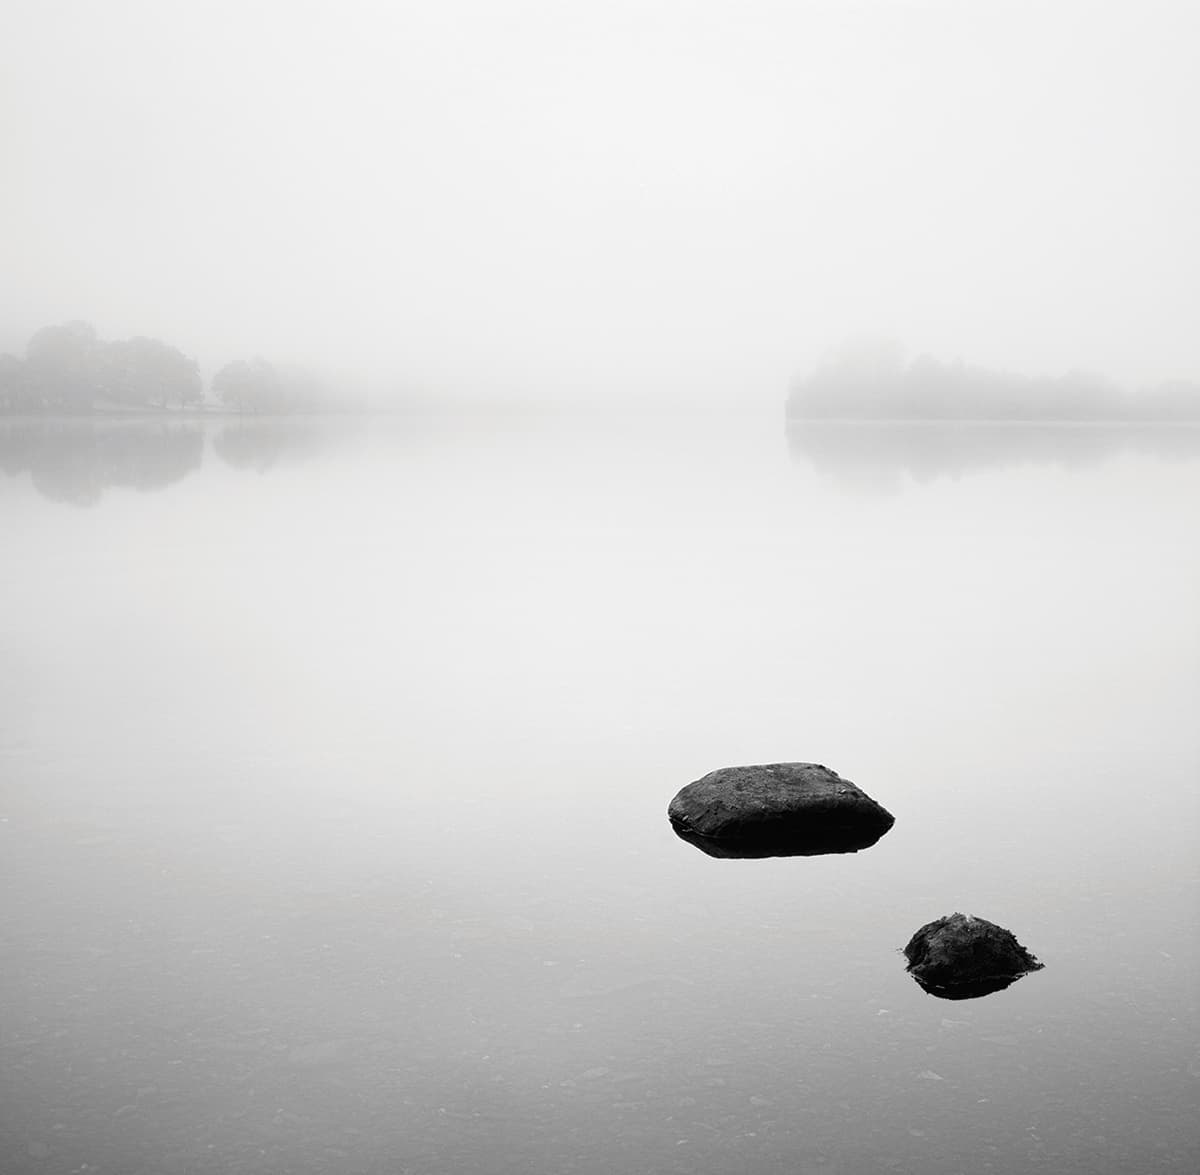 Derwentwater, Lake District. Mist and fog are ideal for minimalist black and white images. Canon EOS 5D Mk II, 24-70mm, 1/250sec @ f/8, ISO 400